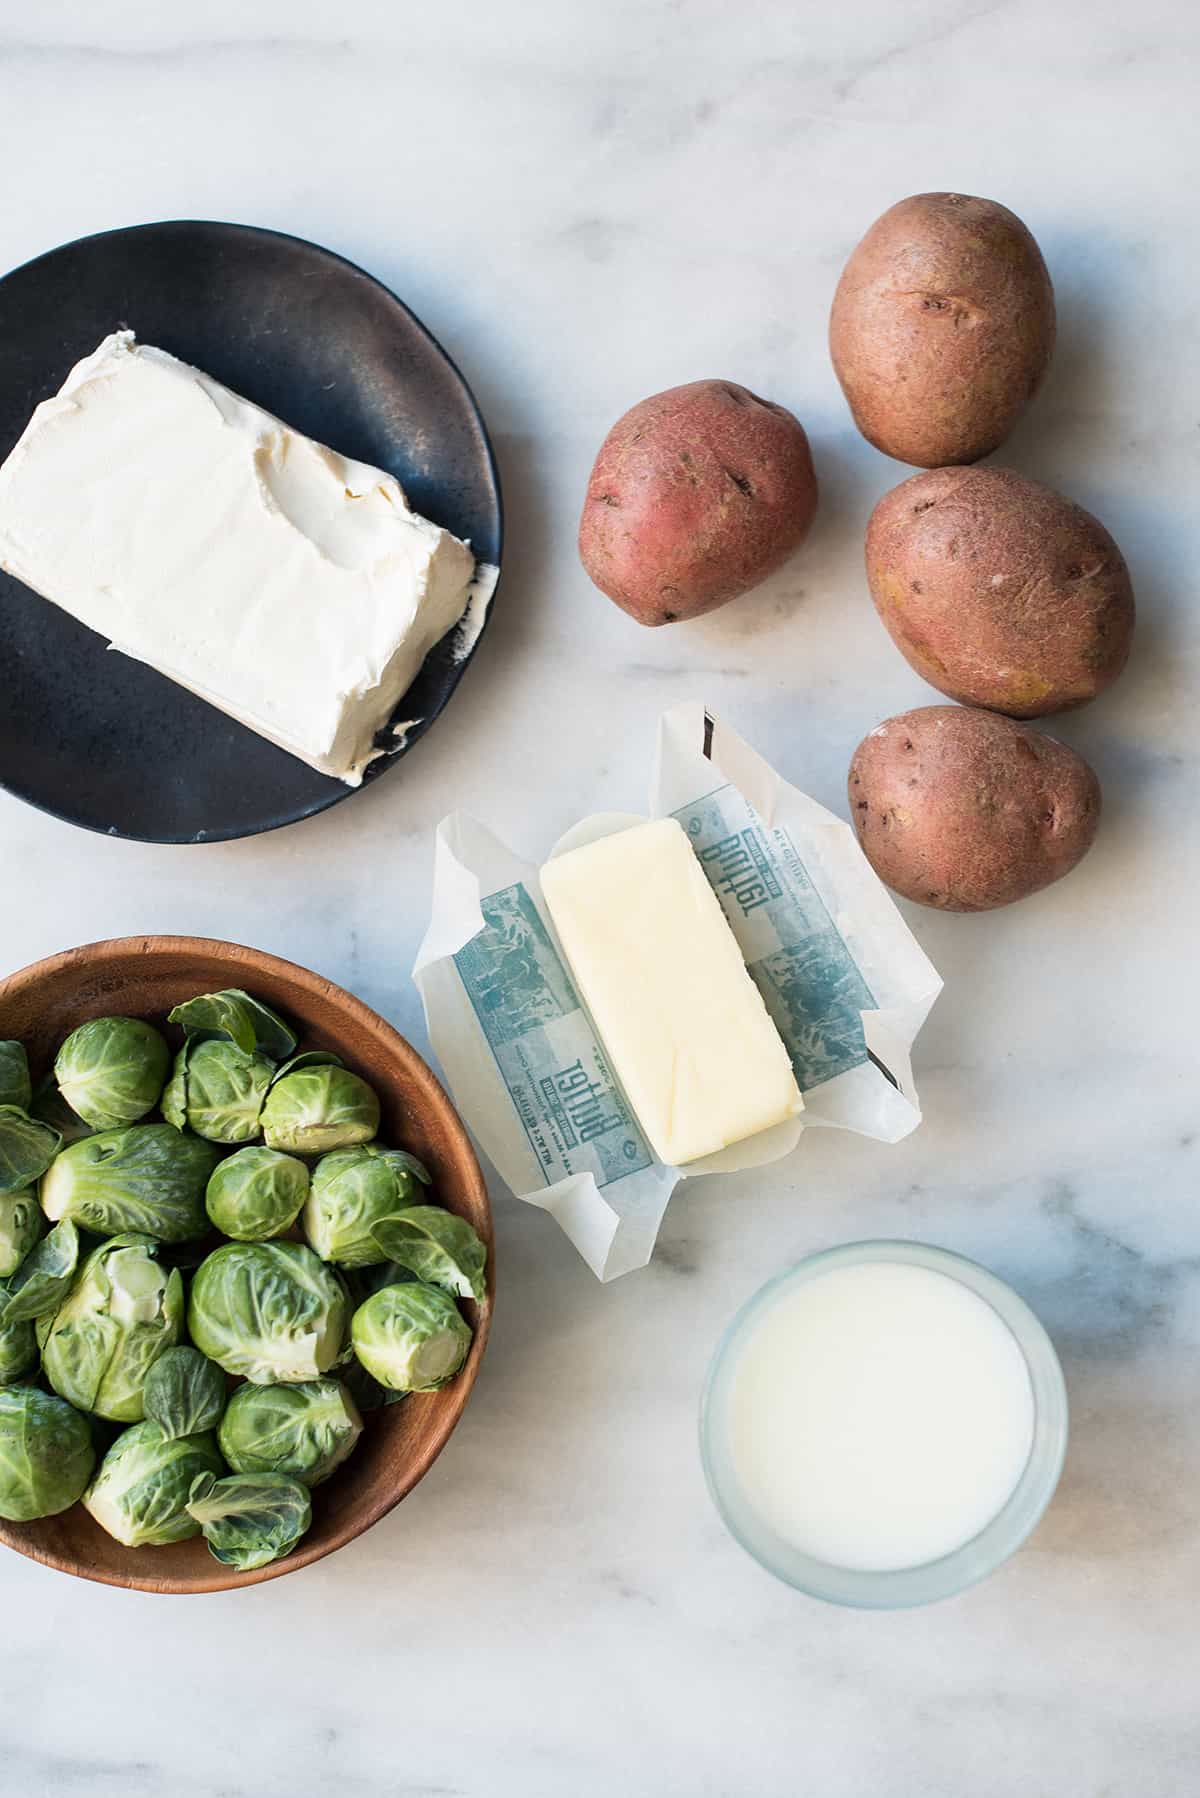 ingredients for Broiled Mashed Potatoes with Roasted Sprouts